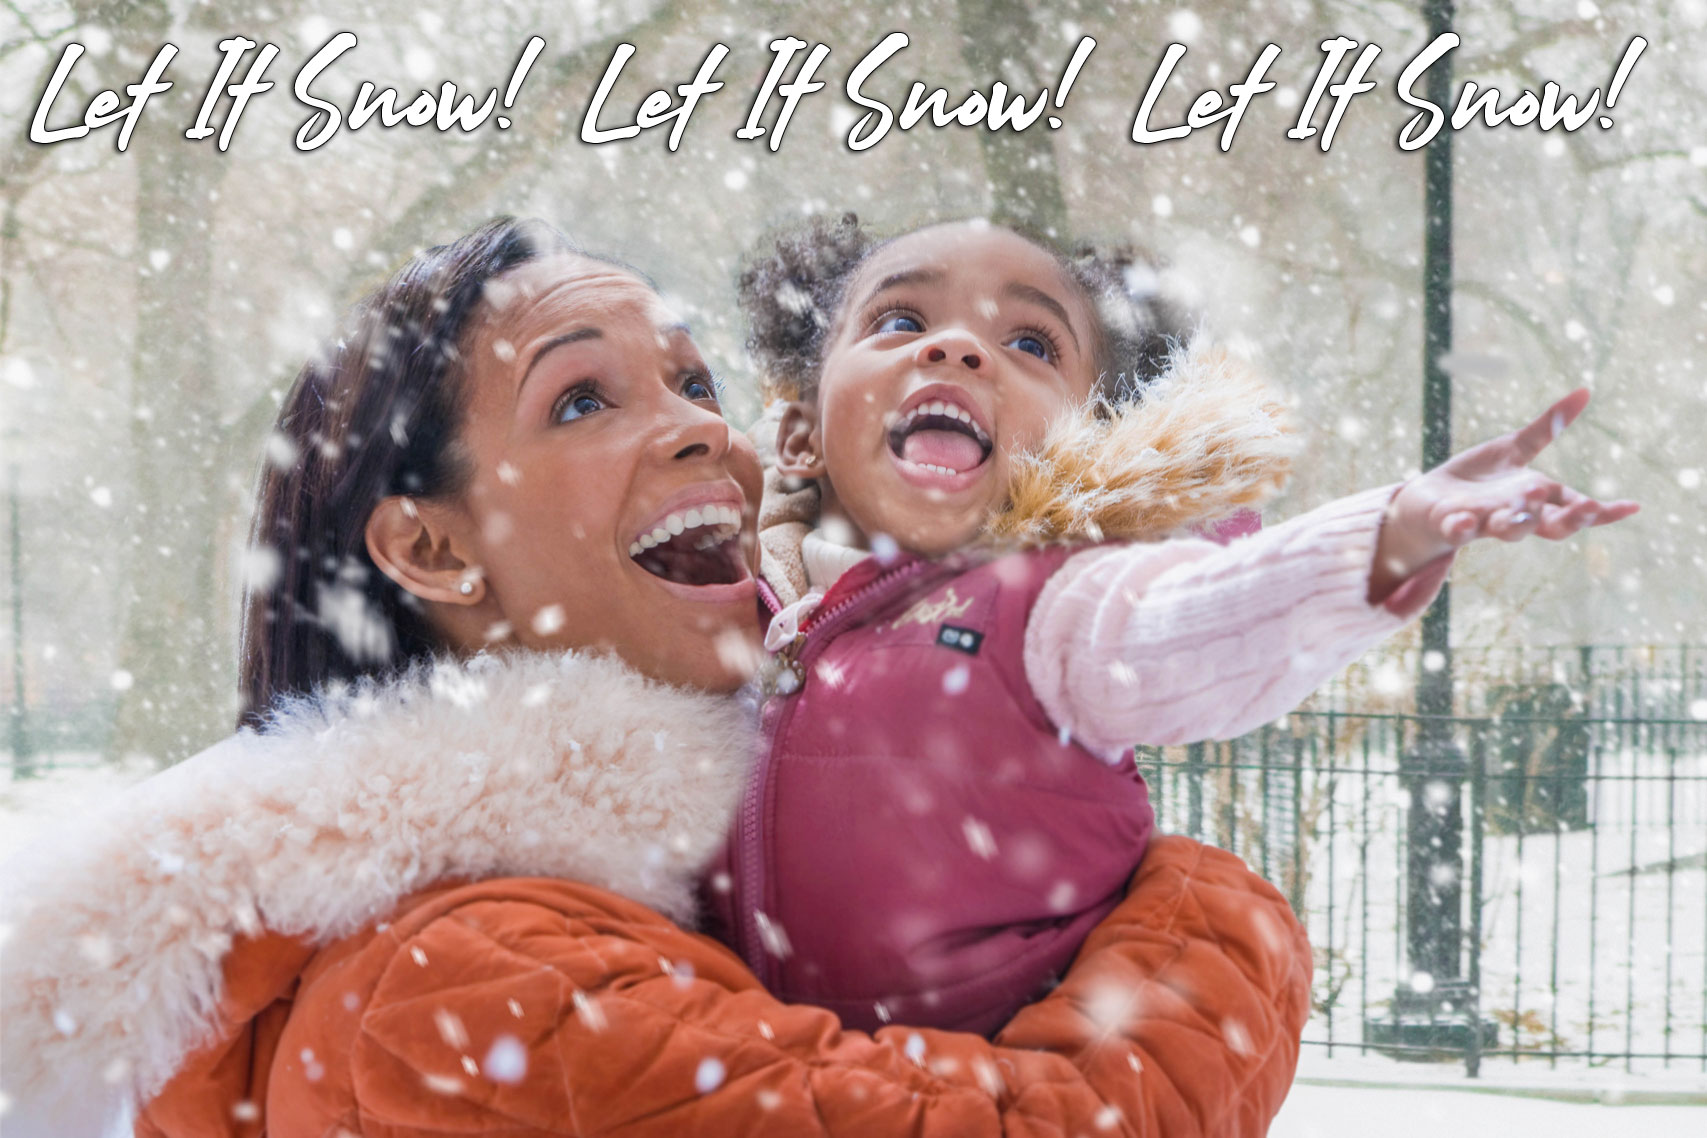 Christmas carol spotlight: Let It Snow! - This snowy song is a beloved Christmas tune with an interesting history. #LetItSnow